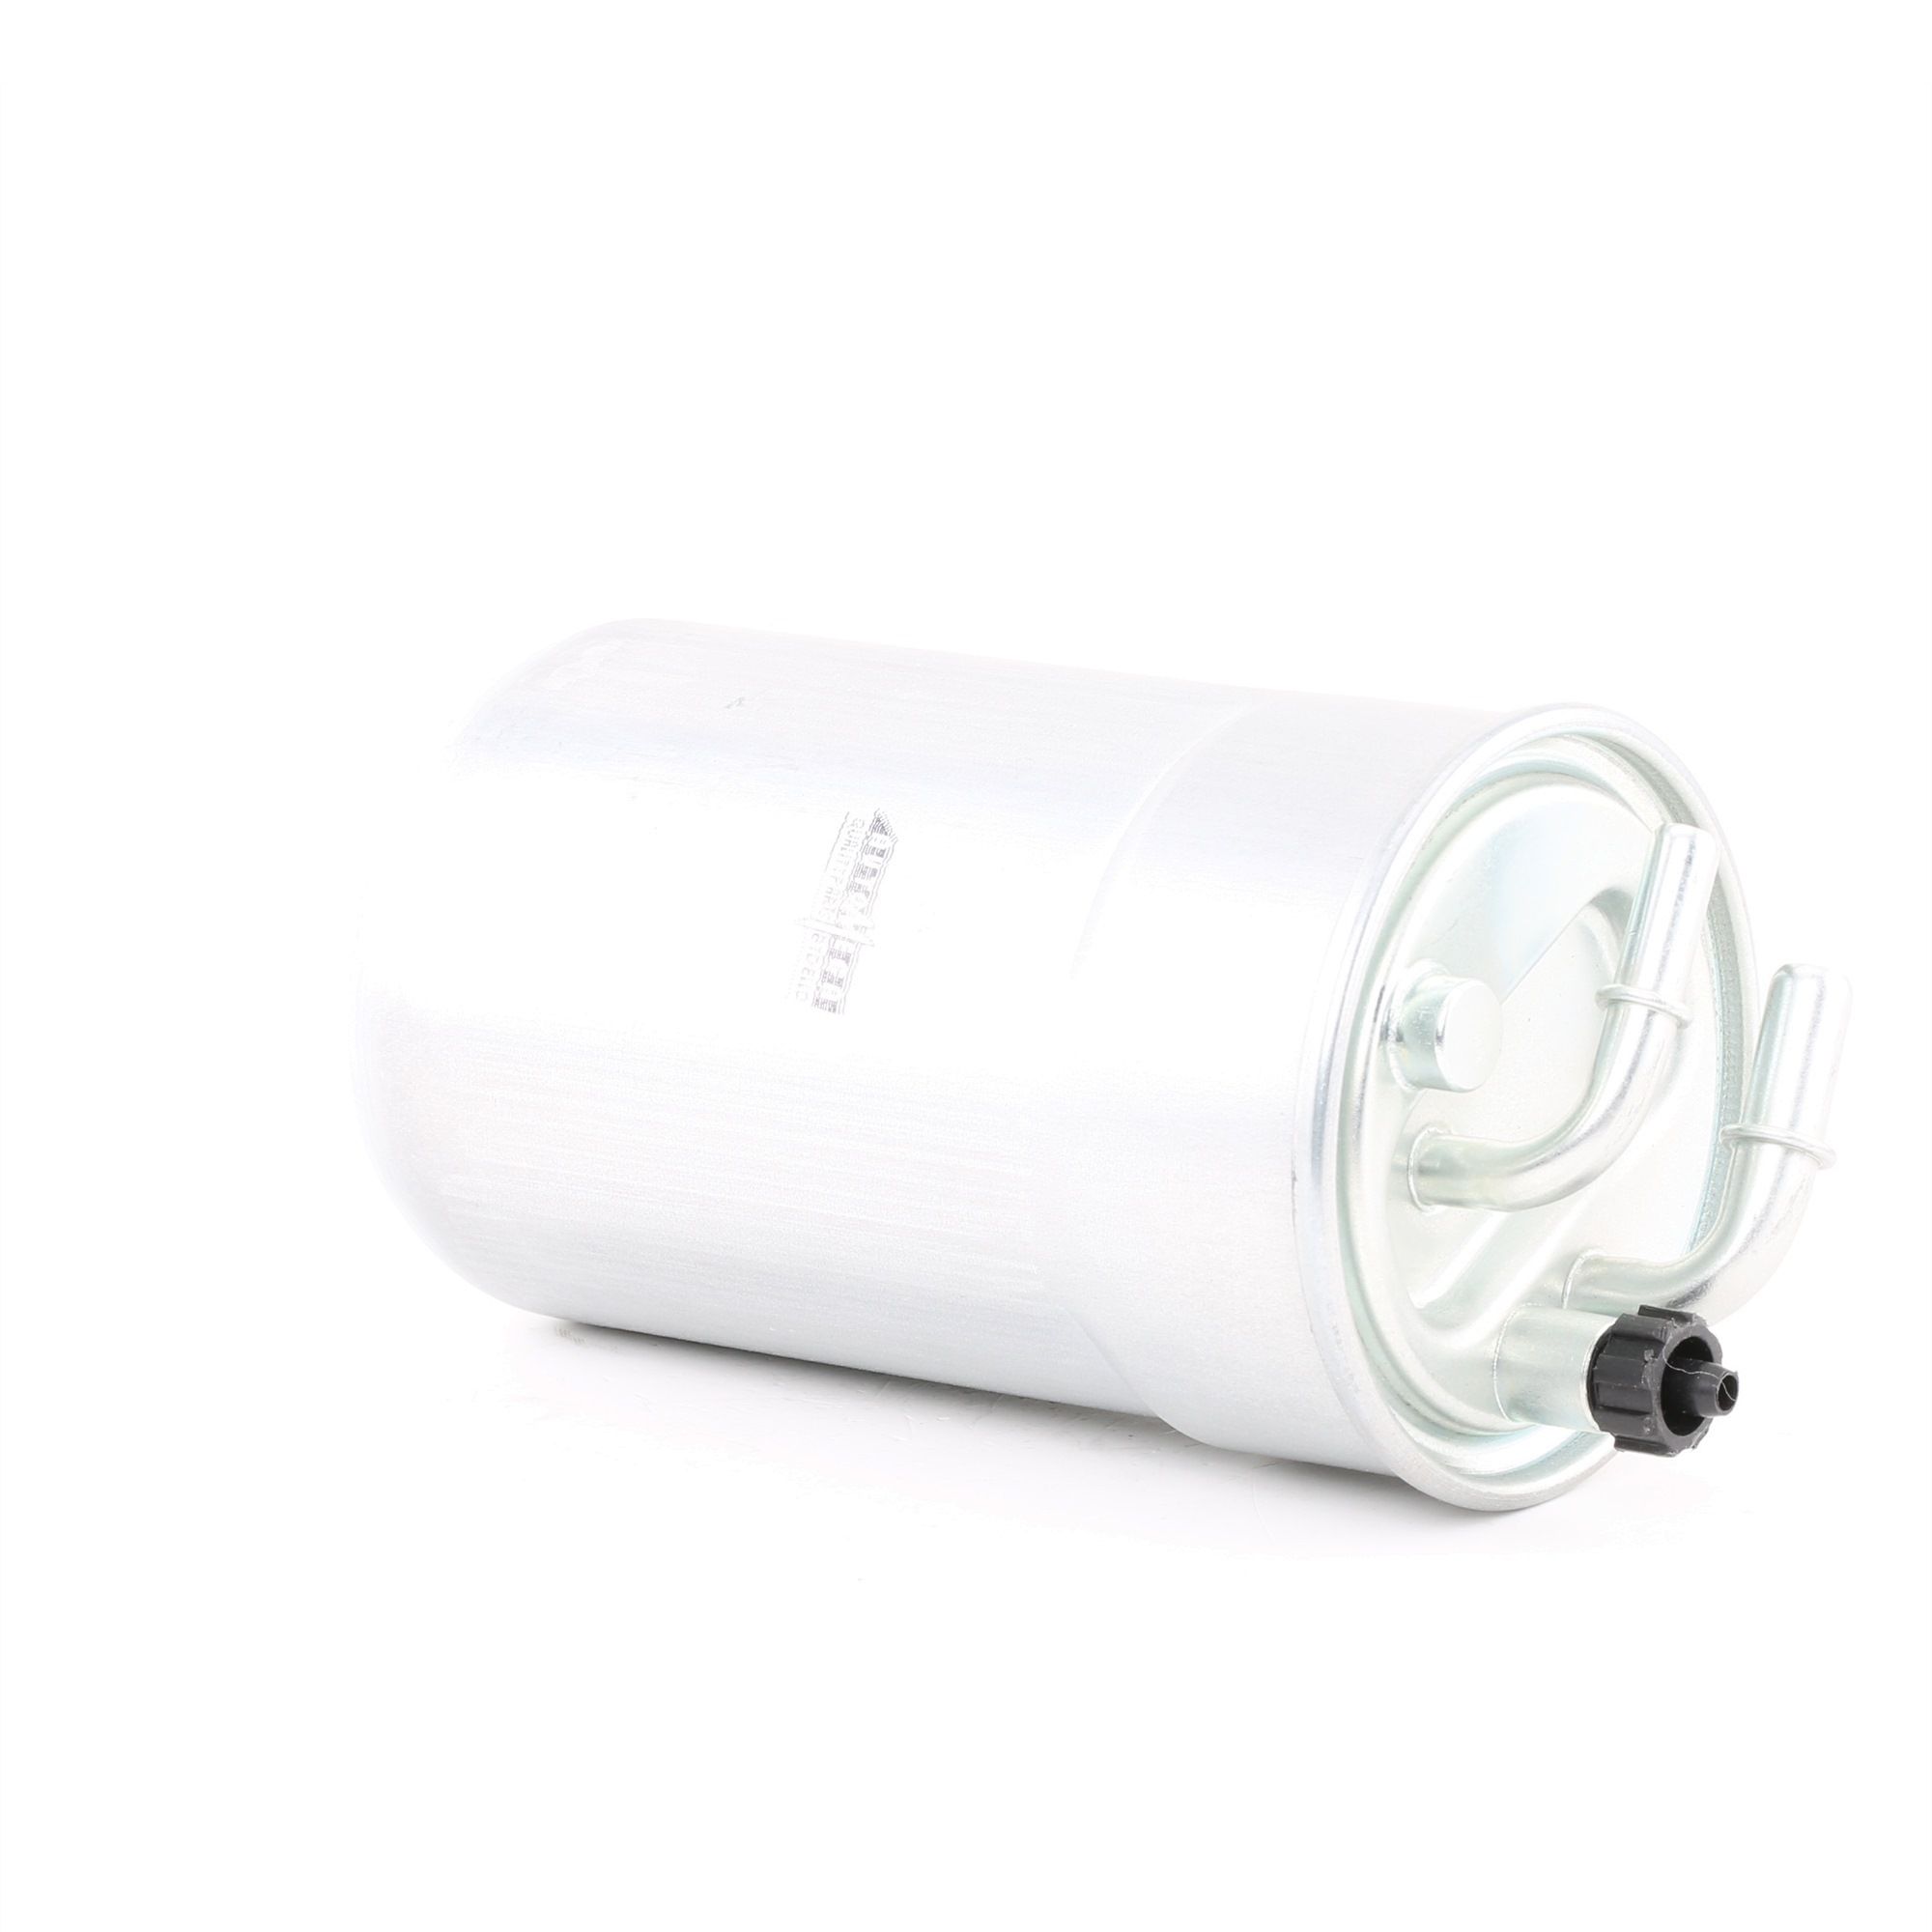 Opel CORSA Inline fuel filter 9093658 AUTOMEGA 180009210 online buy